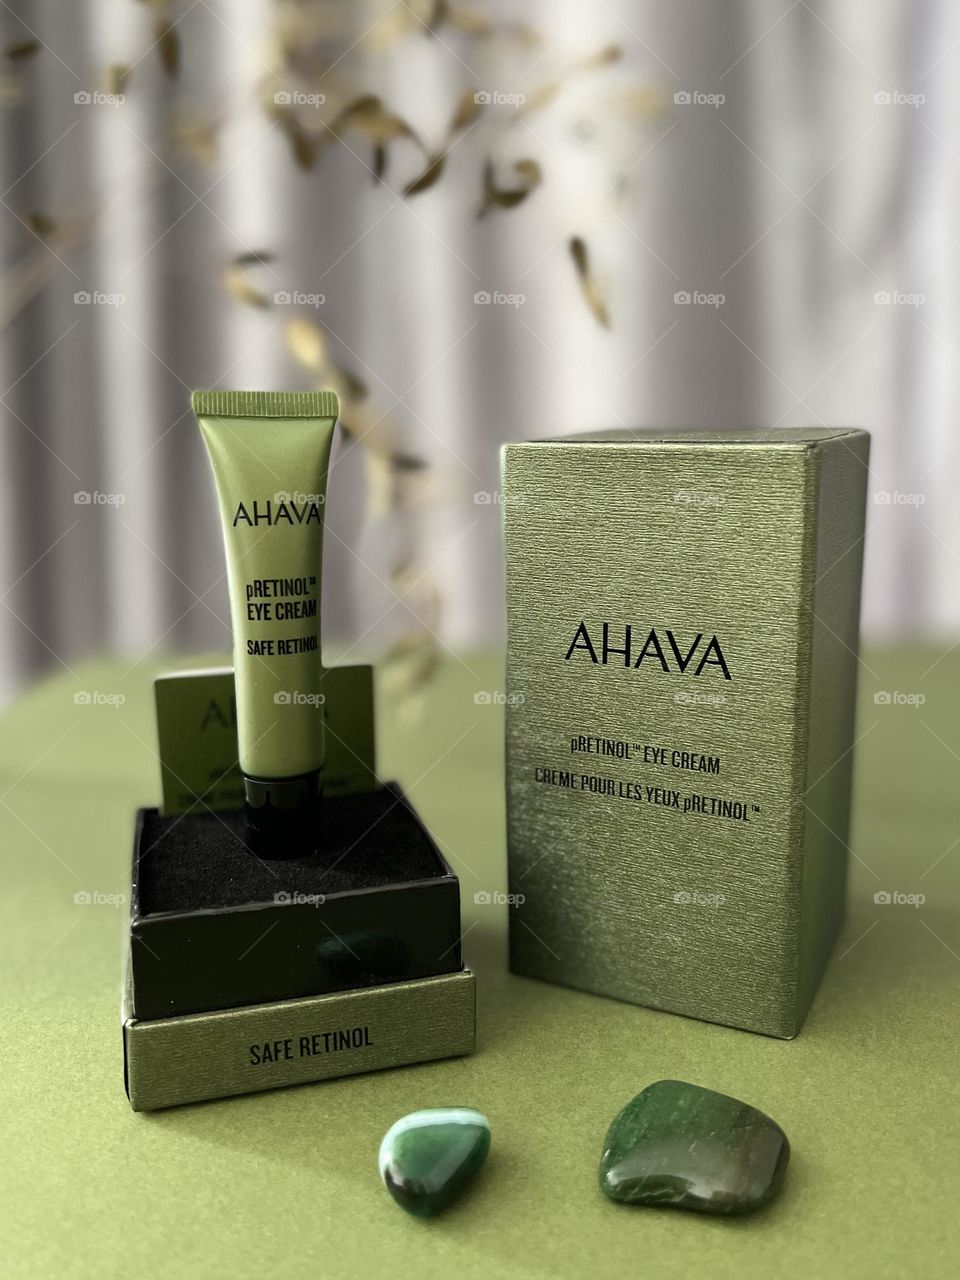 AHAVA safe retinol eye cream, firming and anti-wrinkle. Natural cosmetic from Dead Sea alga’s. For delicate eye area, work for wrinkle reduction, younger look and brighter skin.